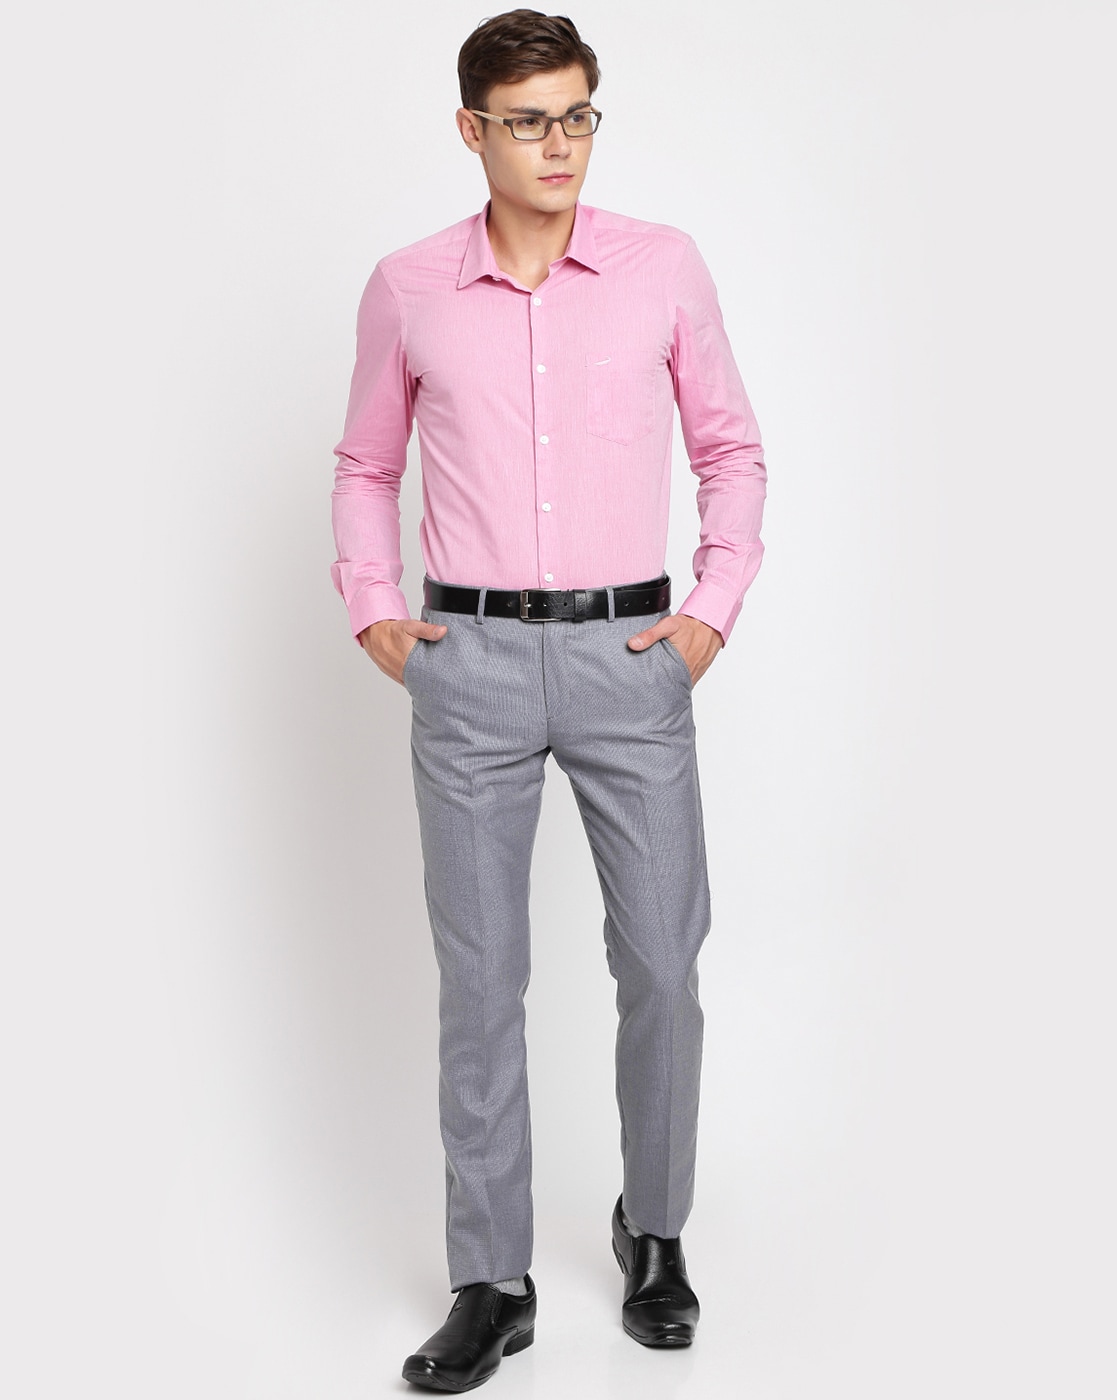 Mens Clothing Sale | Up to 50% OFF Selected Styles | Politix